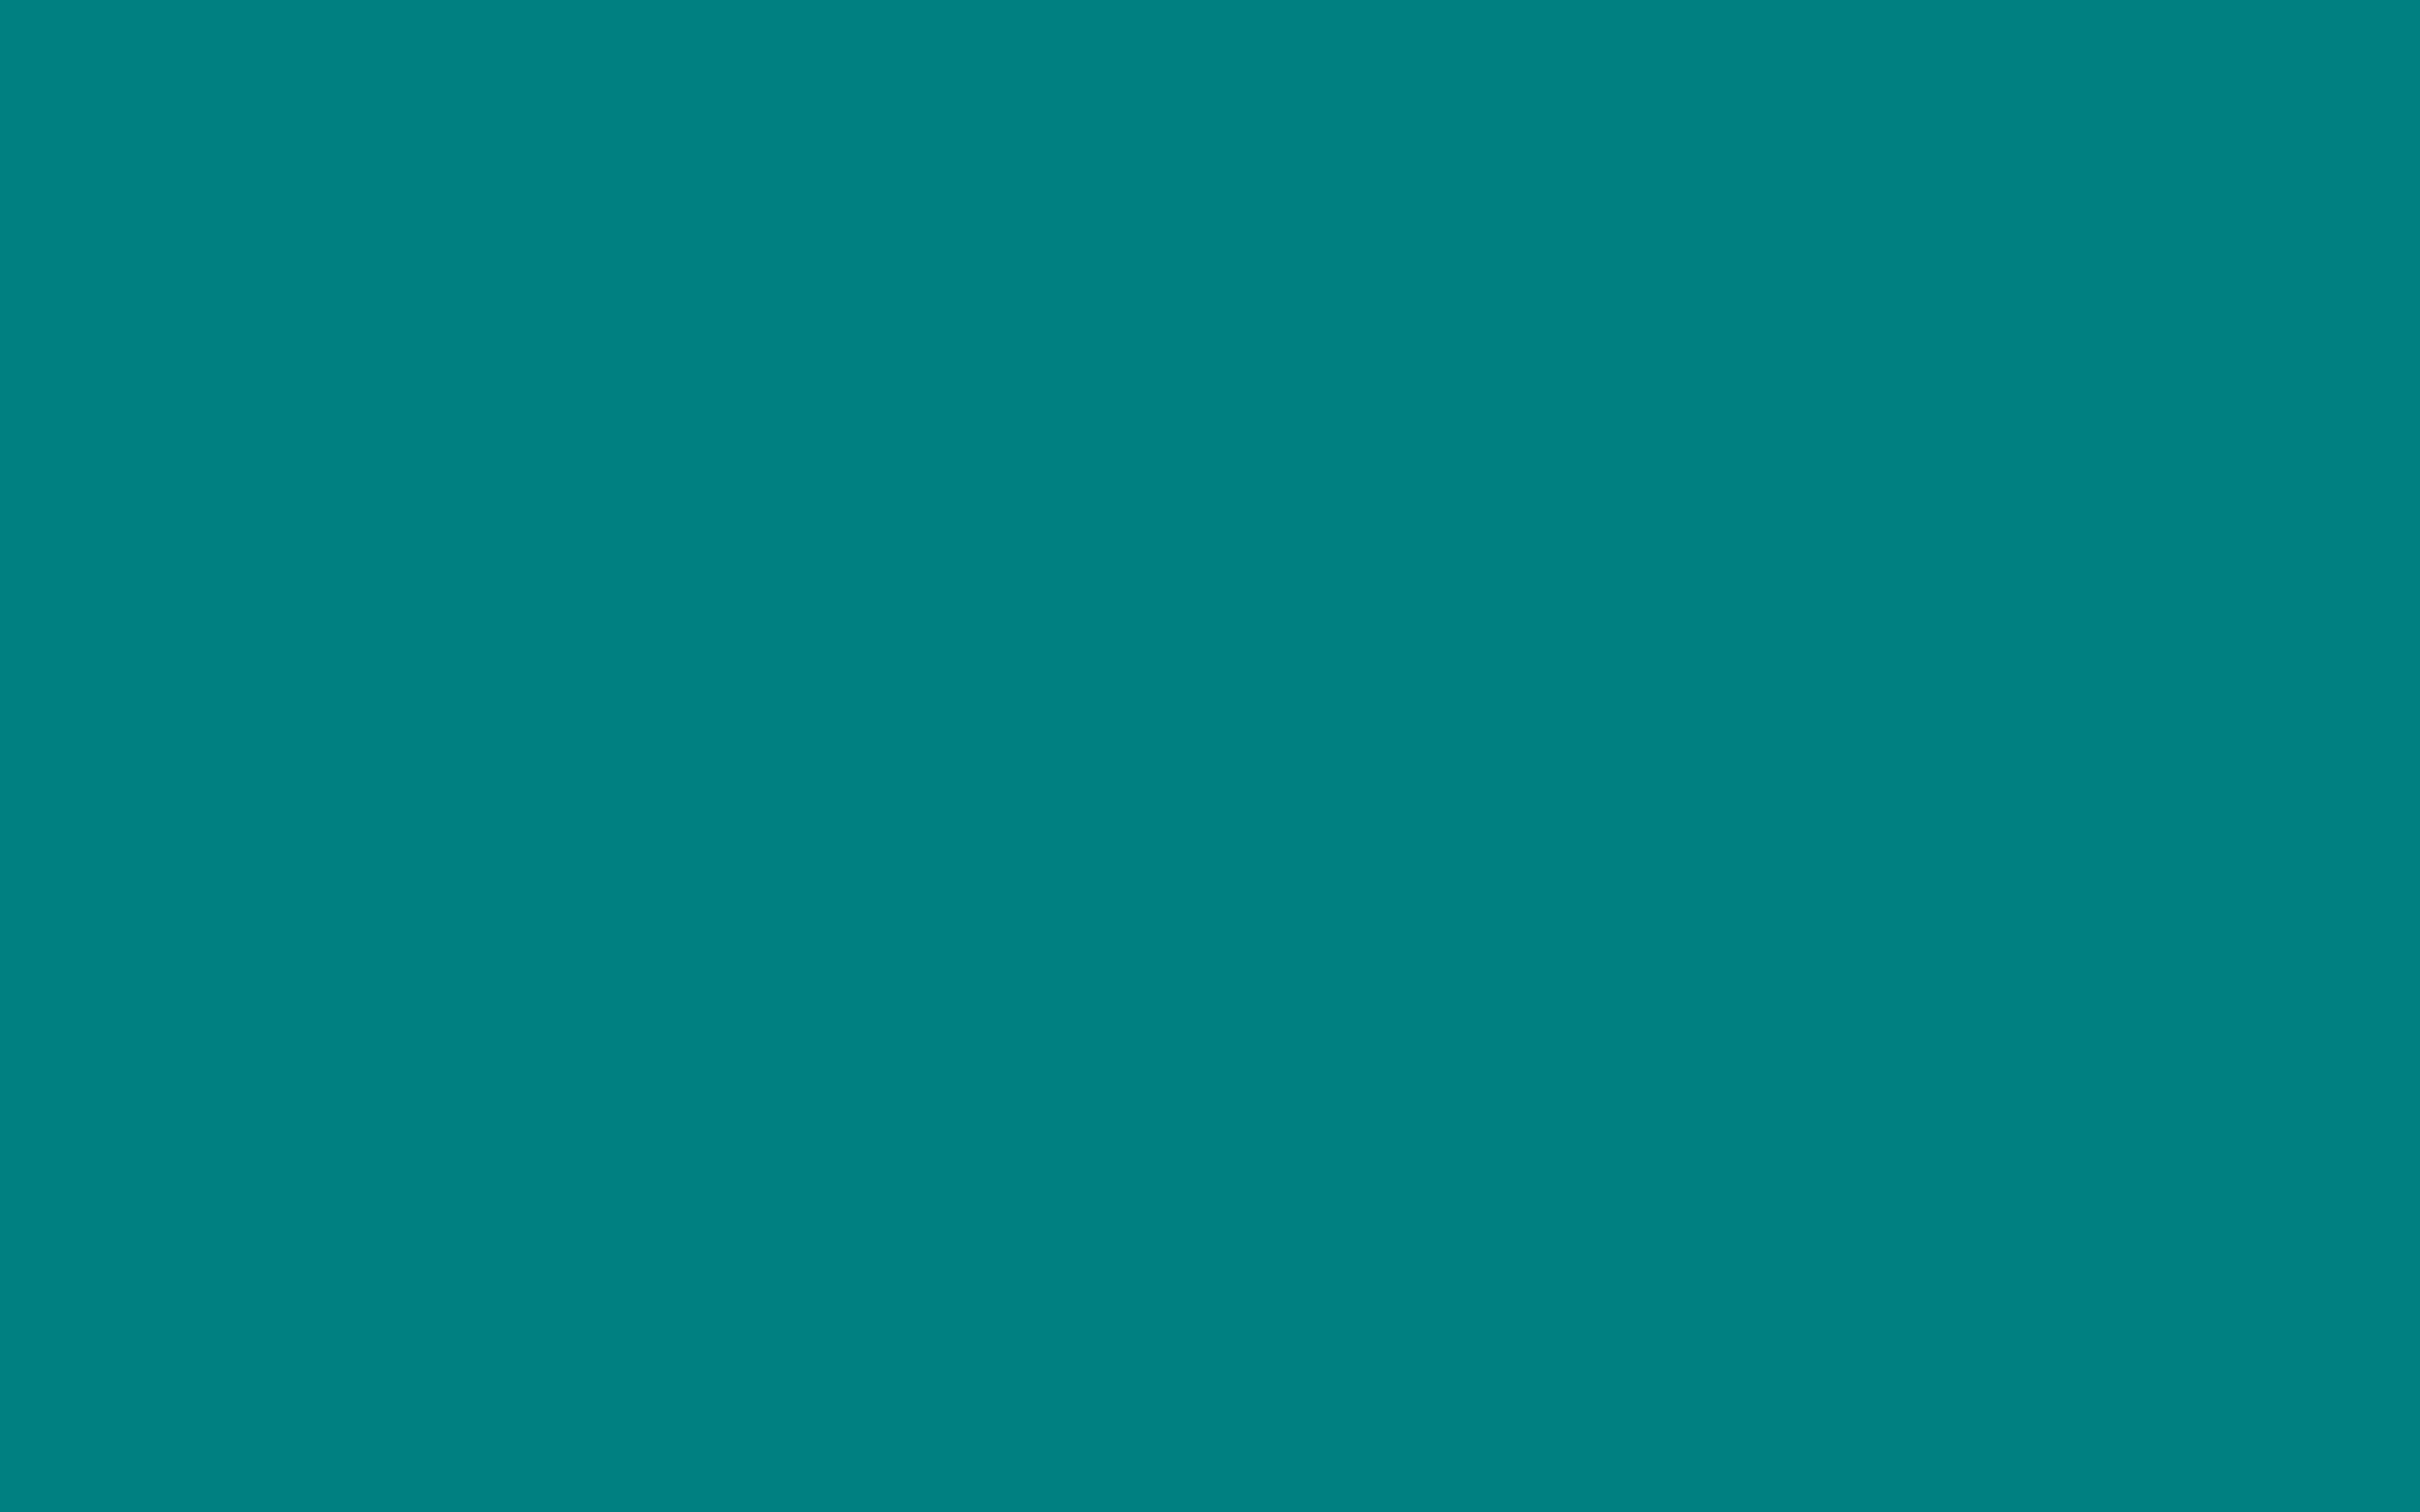 A teal colored background with no text - Windows 95, Windows 98